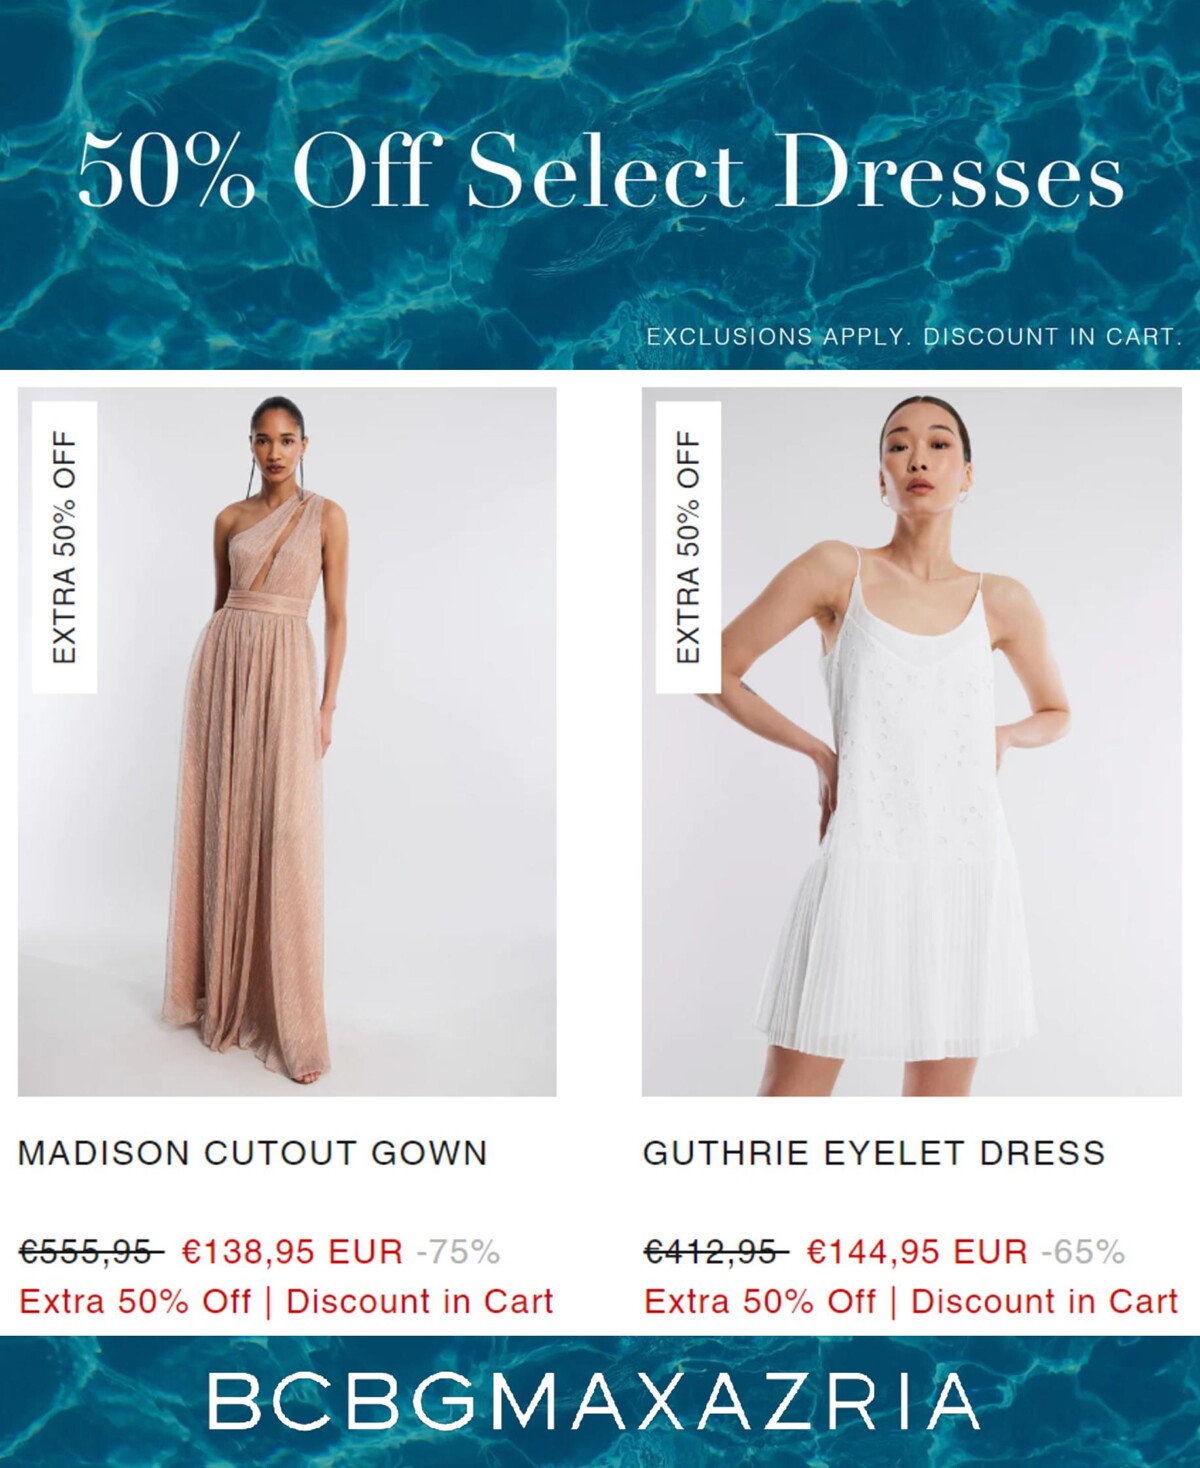 Catalogue 50% Off Select Dresses, page 00003